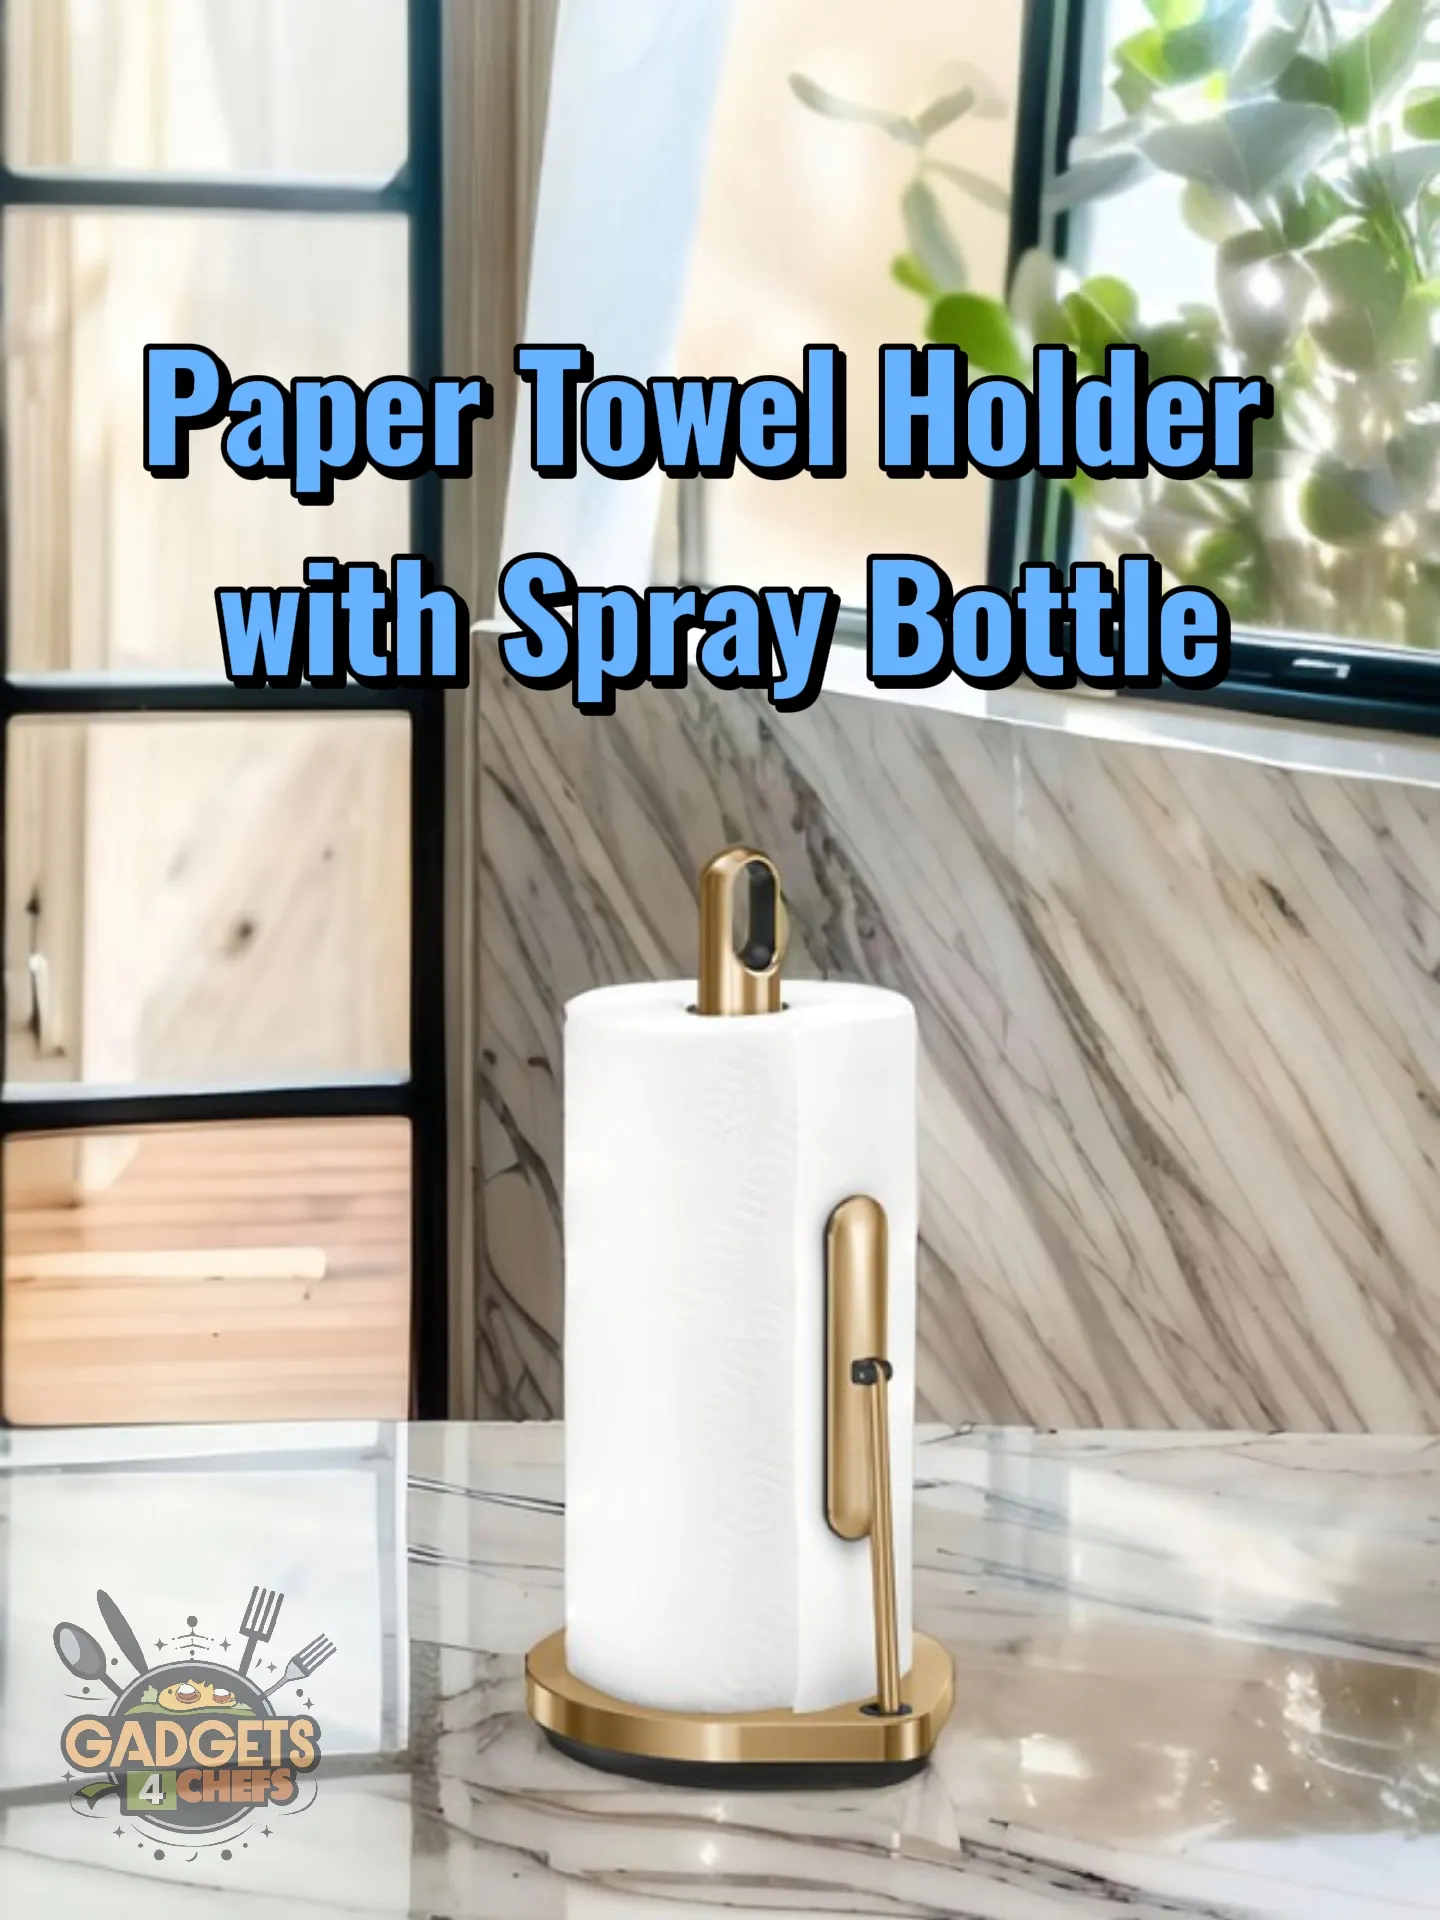 Wekuch Paper Towel Holder with Spray Bottle, Under Cabinet Paper Towels Holders with Sprayer Inside Center, Hanging Wall Mount Papertowels Roller